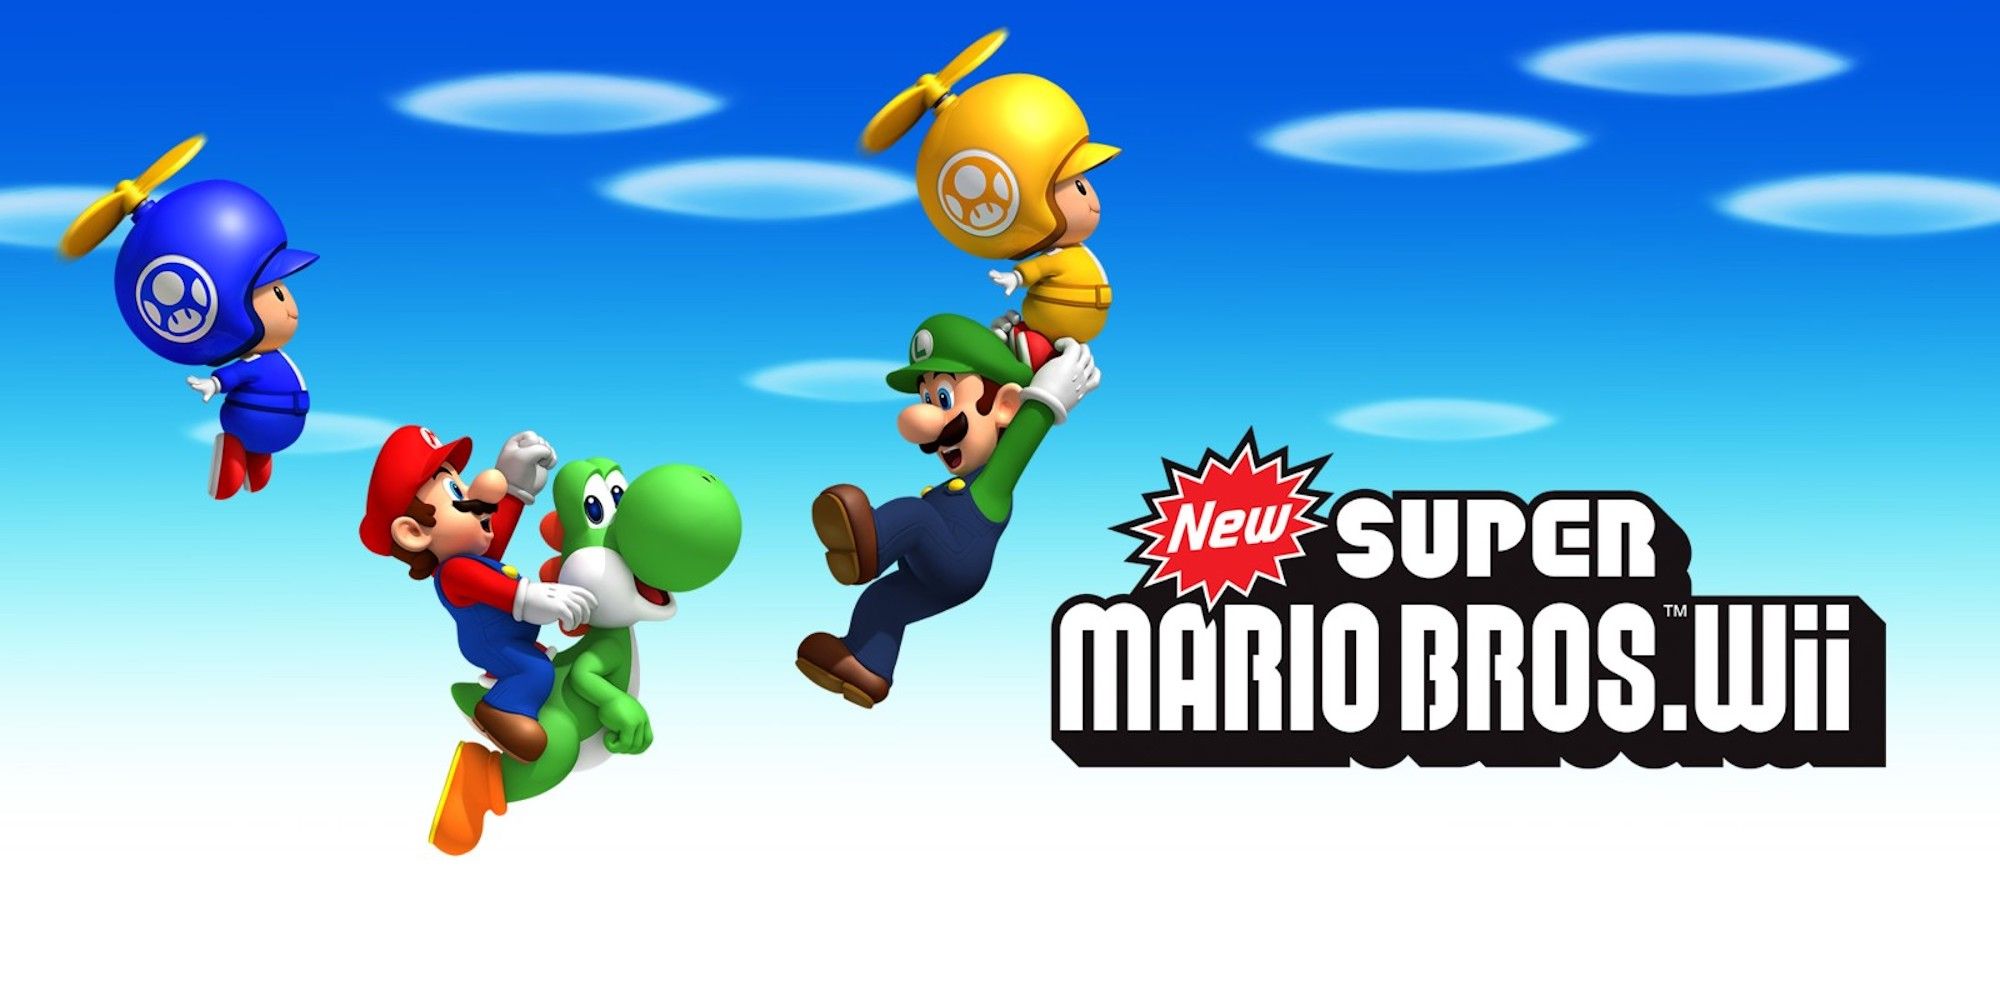 Promo art featuring characters From New Super Mario Bros. Wii